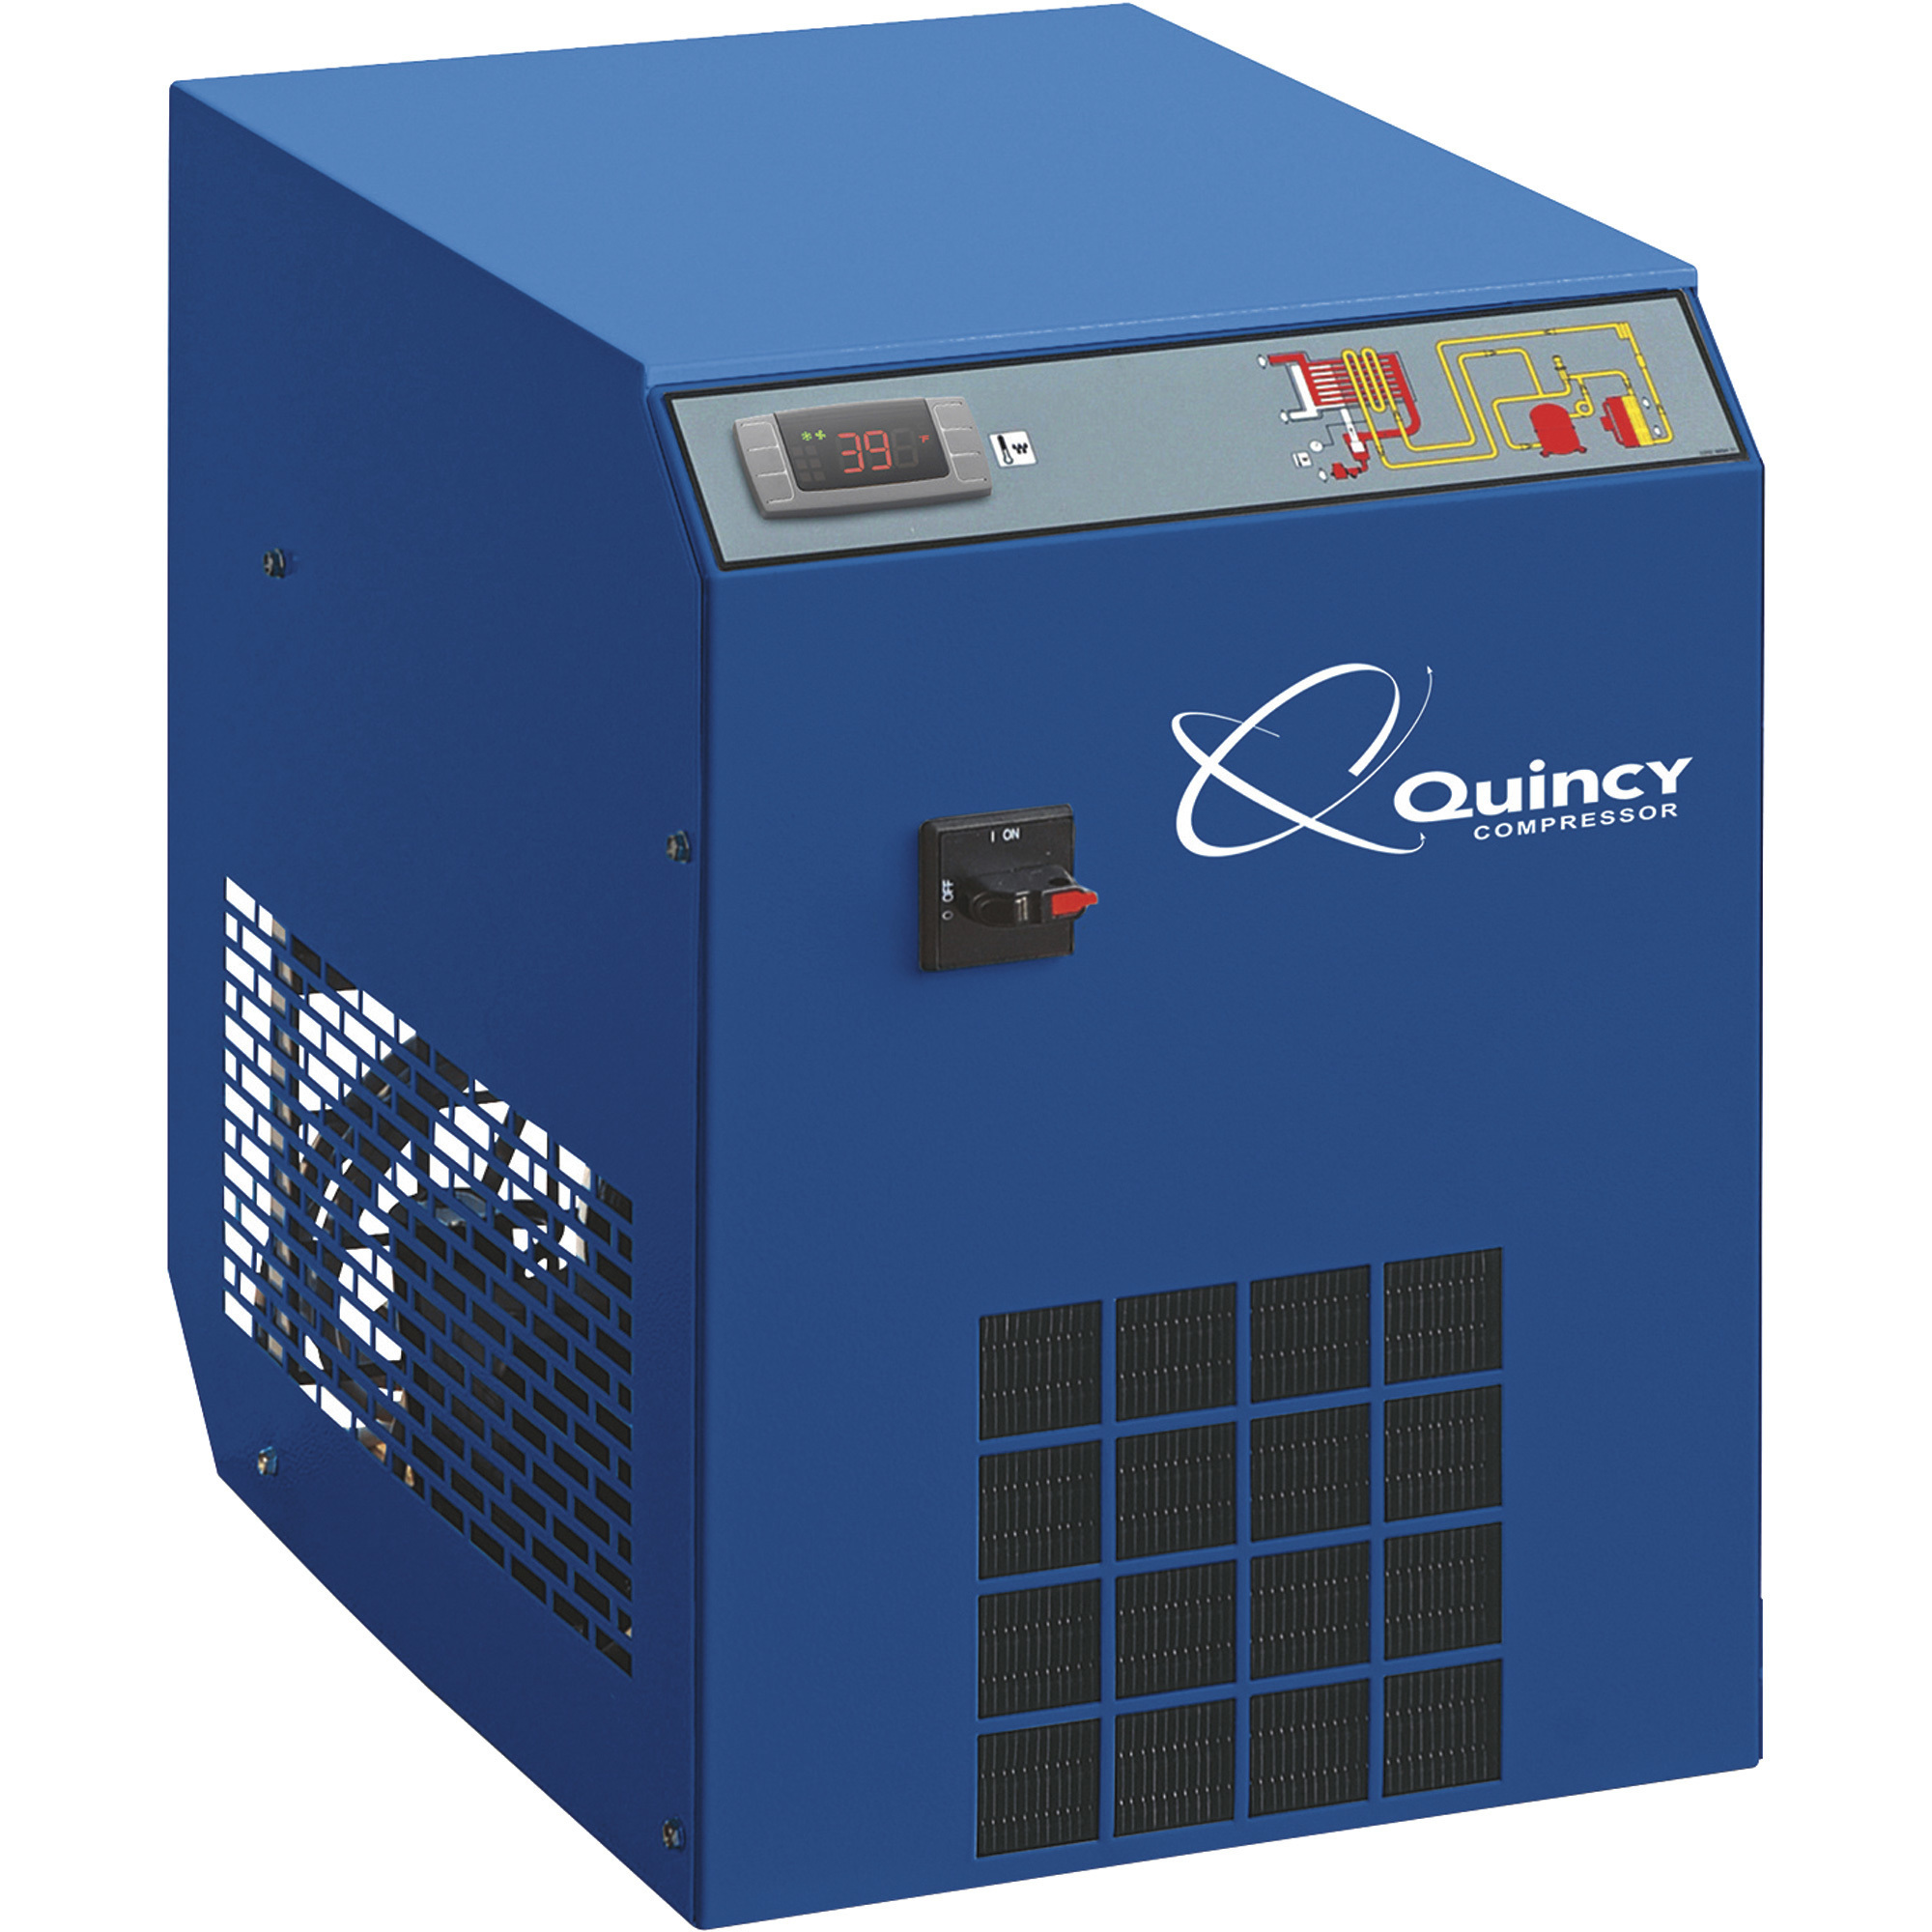 Quincy Refrigerated Air Dryer, Non-Cycling, 30 CFM, 115 Volt, Single Phase, Model QPNC-30